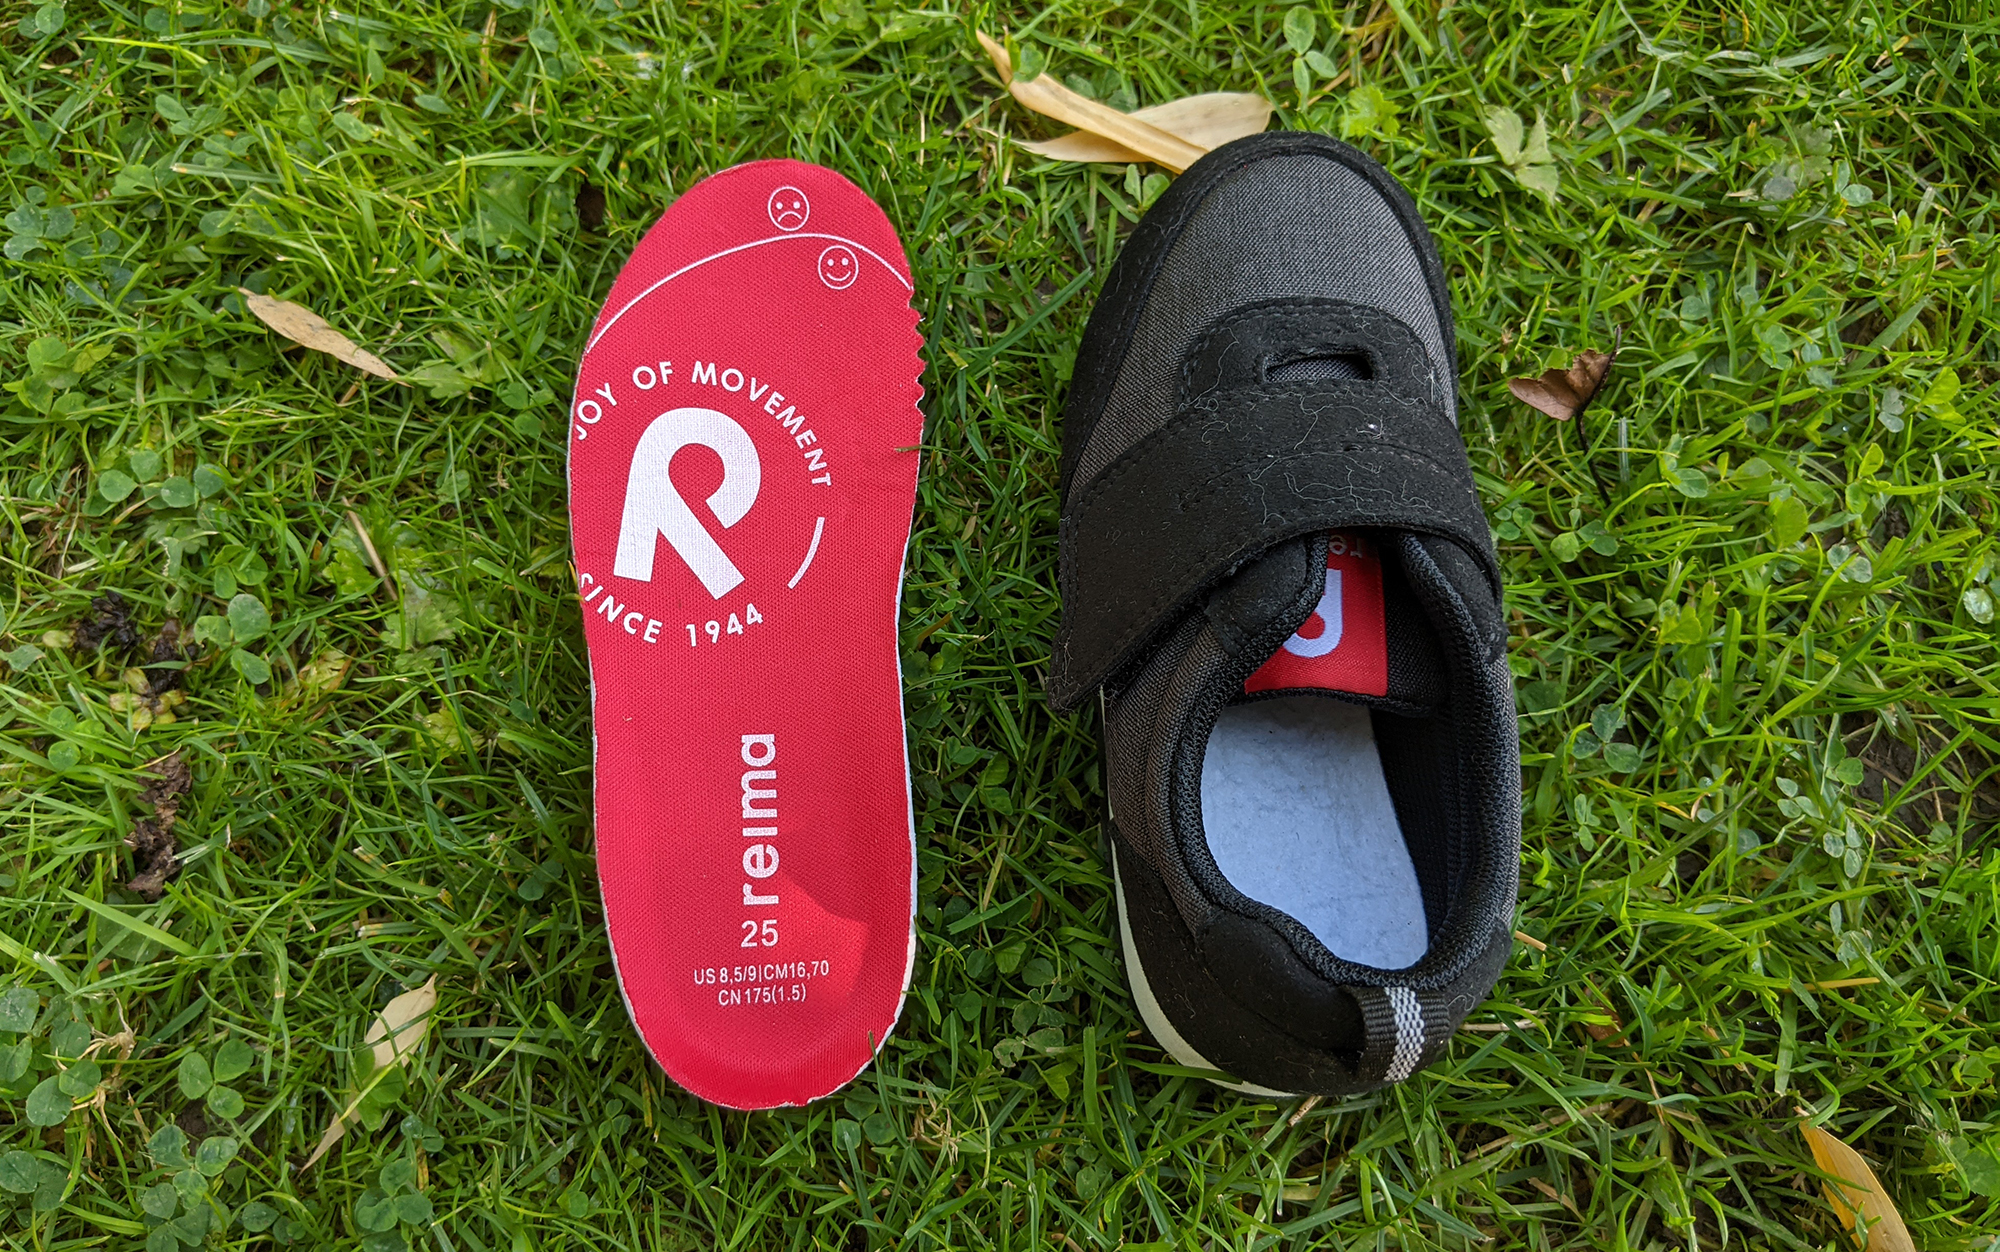 The removable sole of the Reima Evastes can help you determine if itâs the right size before you try to squash it on your kidâs foot.